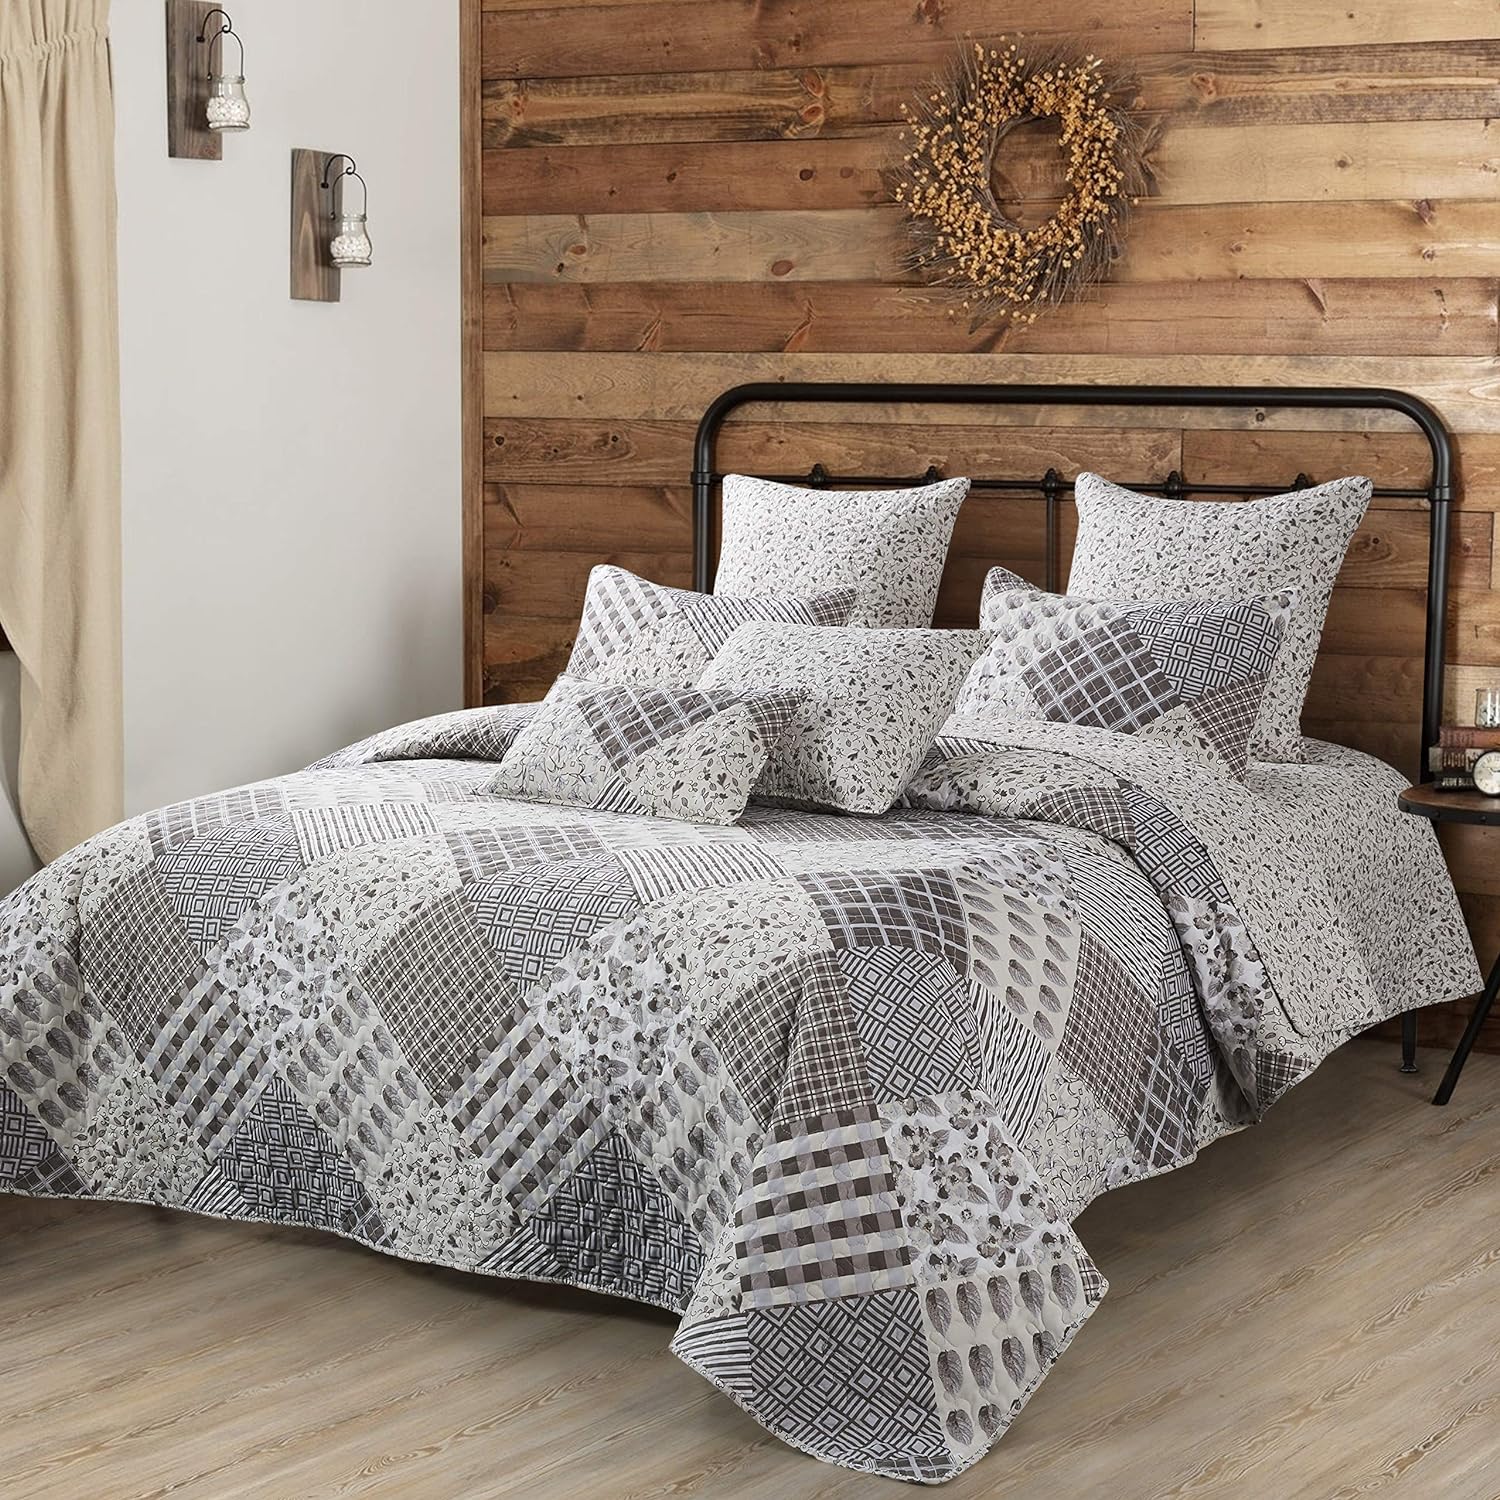 Virah Bella Quilt Bedding Set in King Phyllis Dobbs Charming Grays Printed Lightweight Reversible Quilt with 2 Matching Pillow Shams - Cozy & Beautiful Contemporary-Themed Bedding